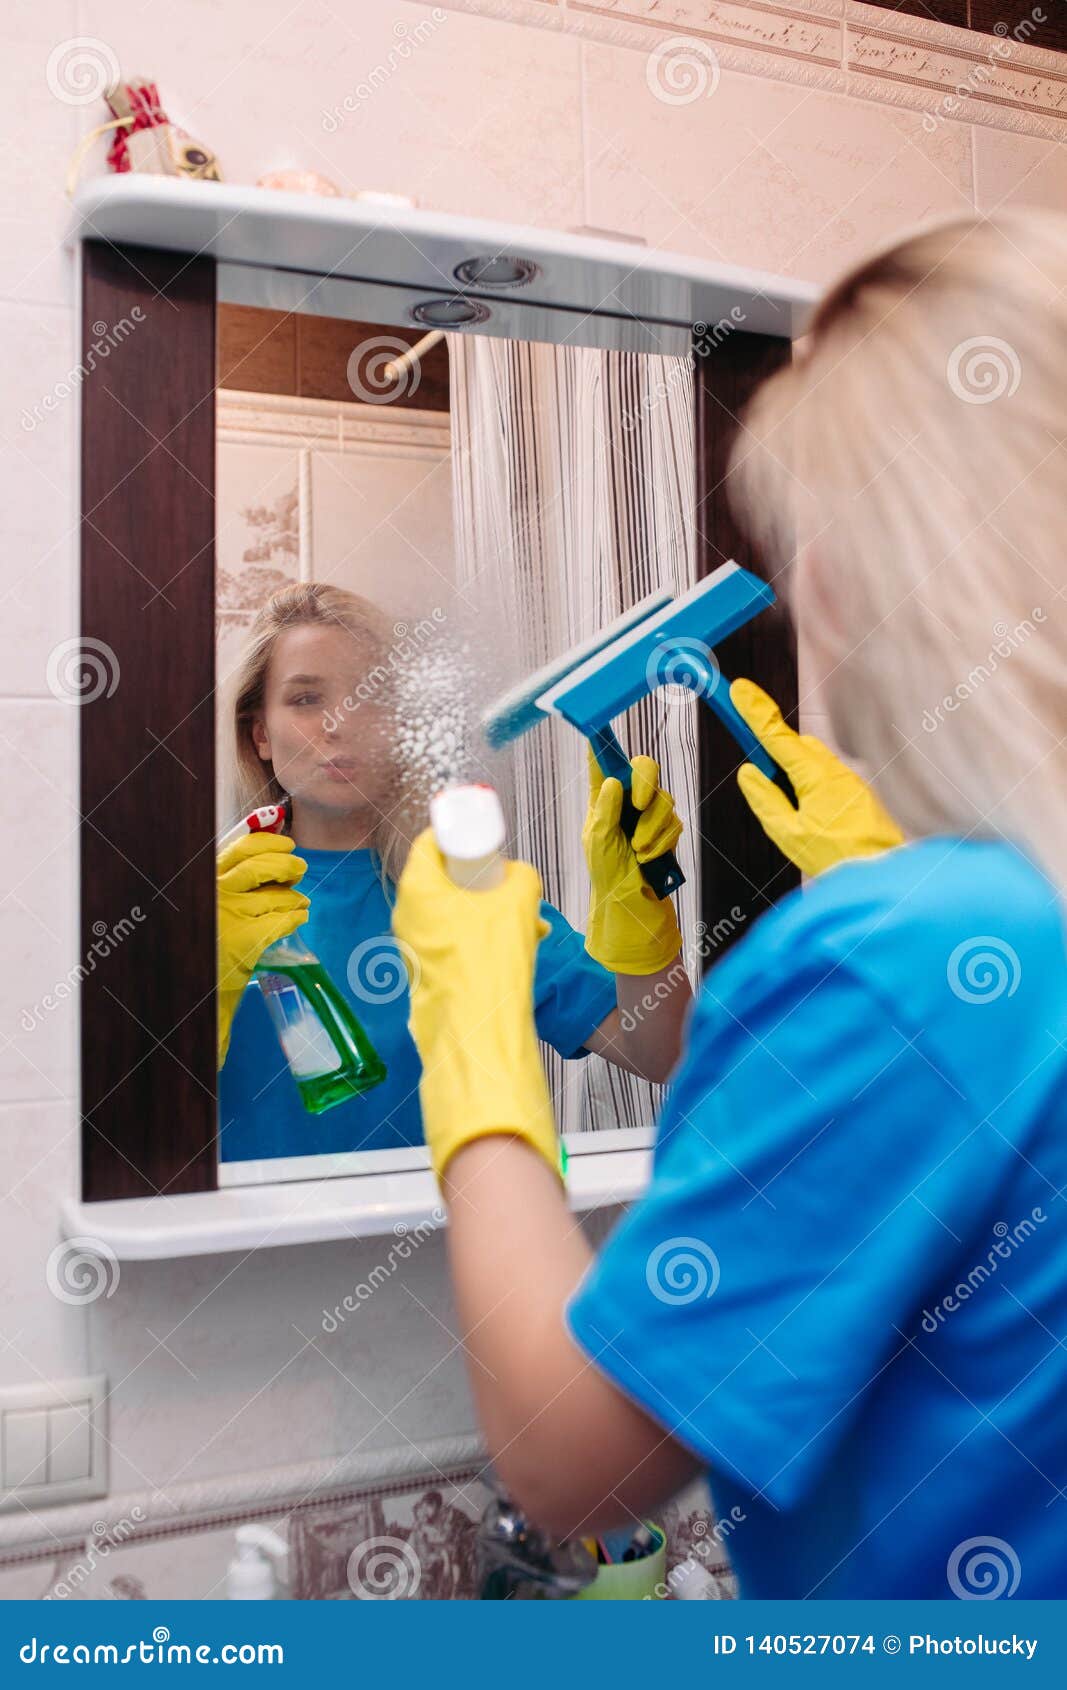 Woman Cleaning With Spray An